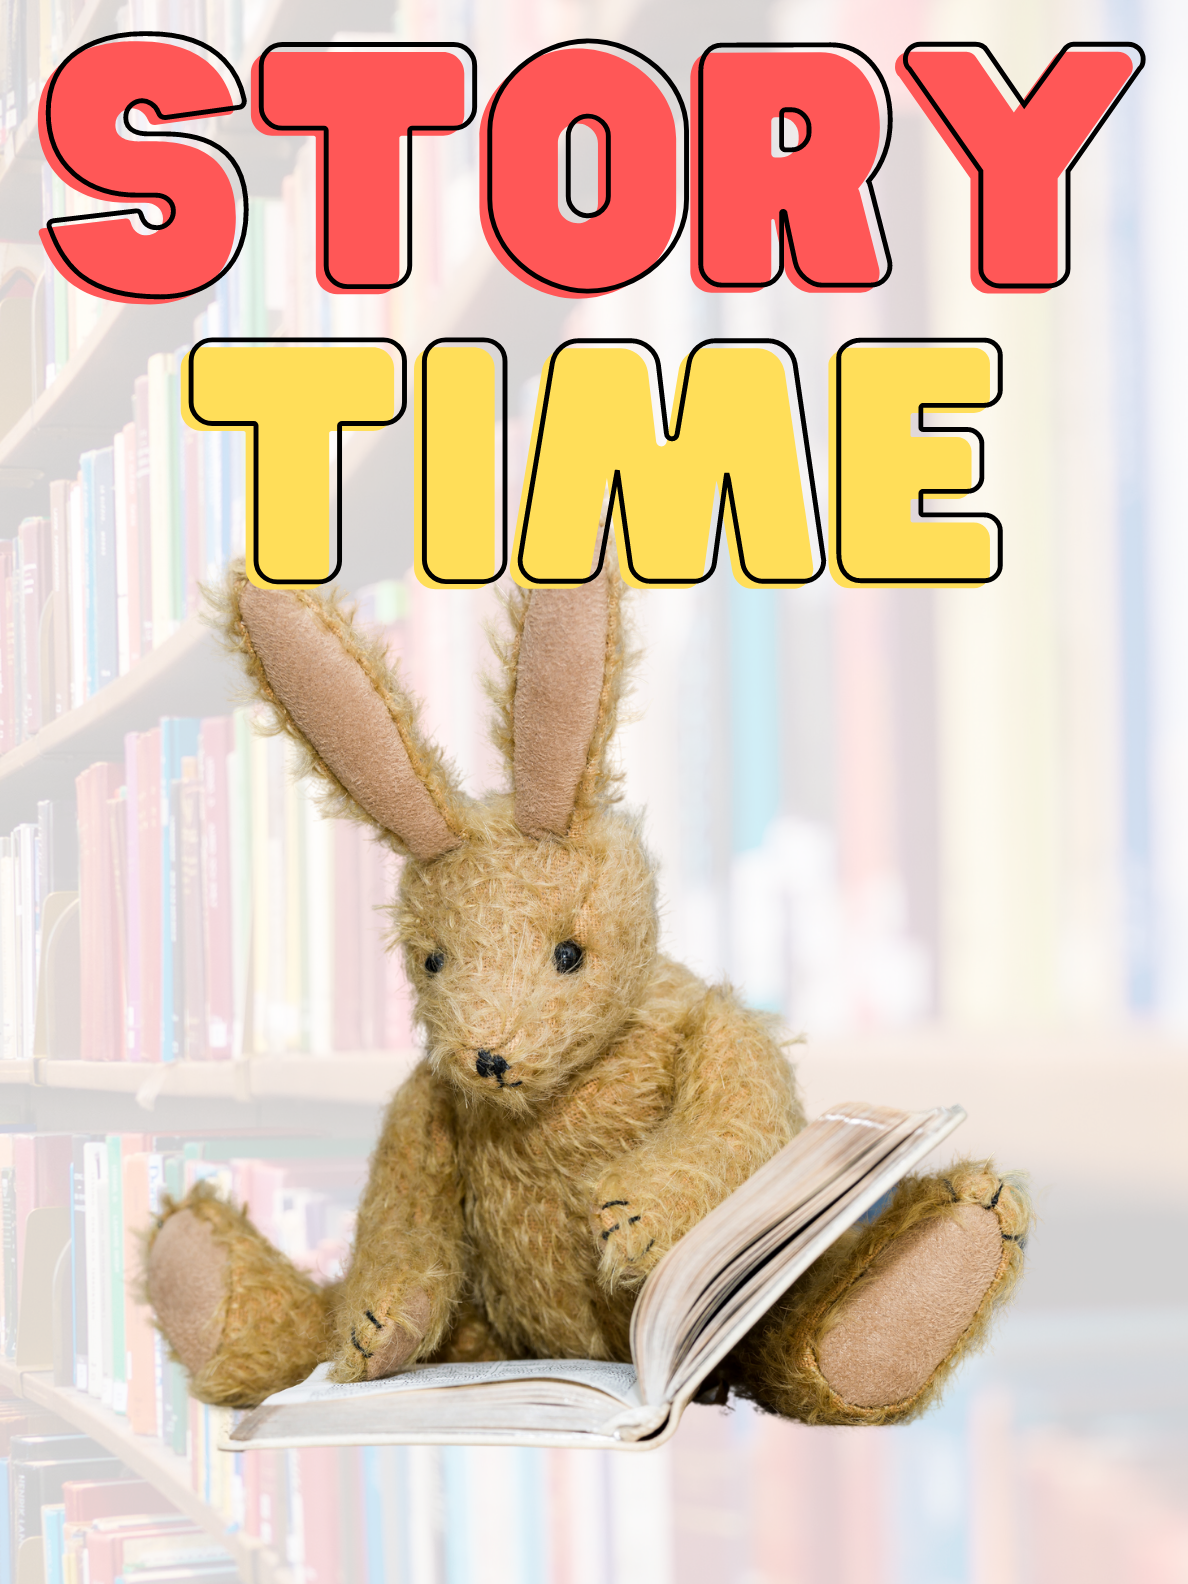 bunny reading a book with the words "story time" above